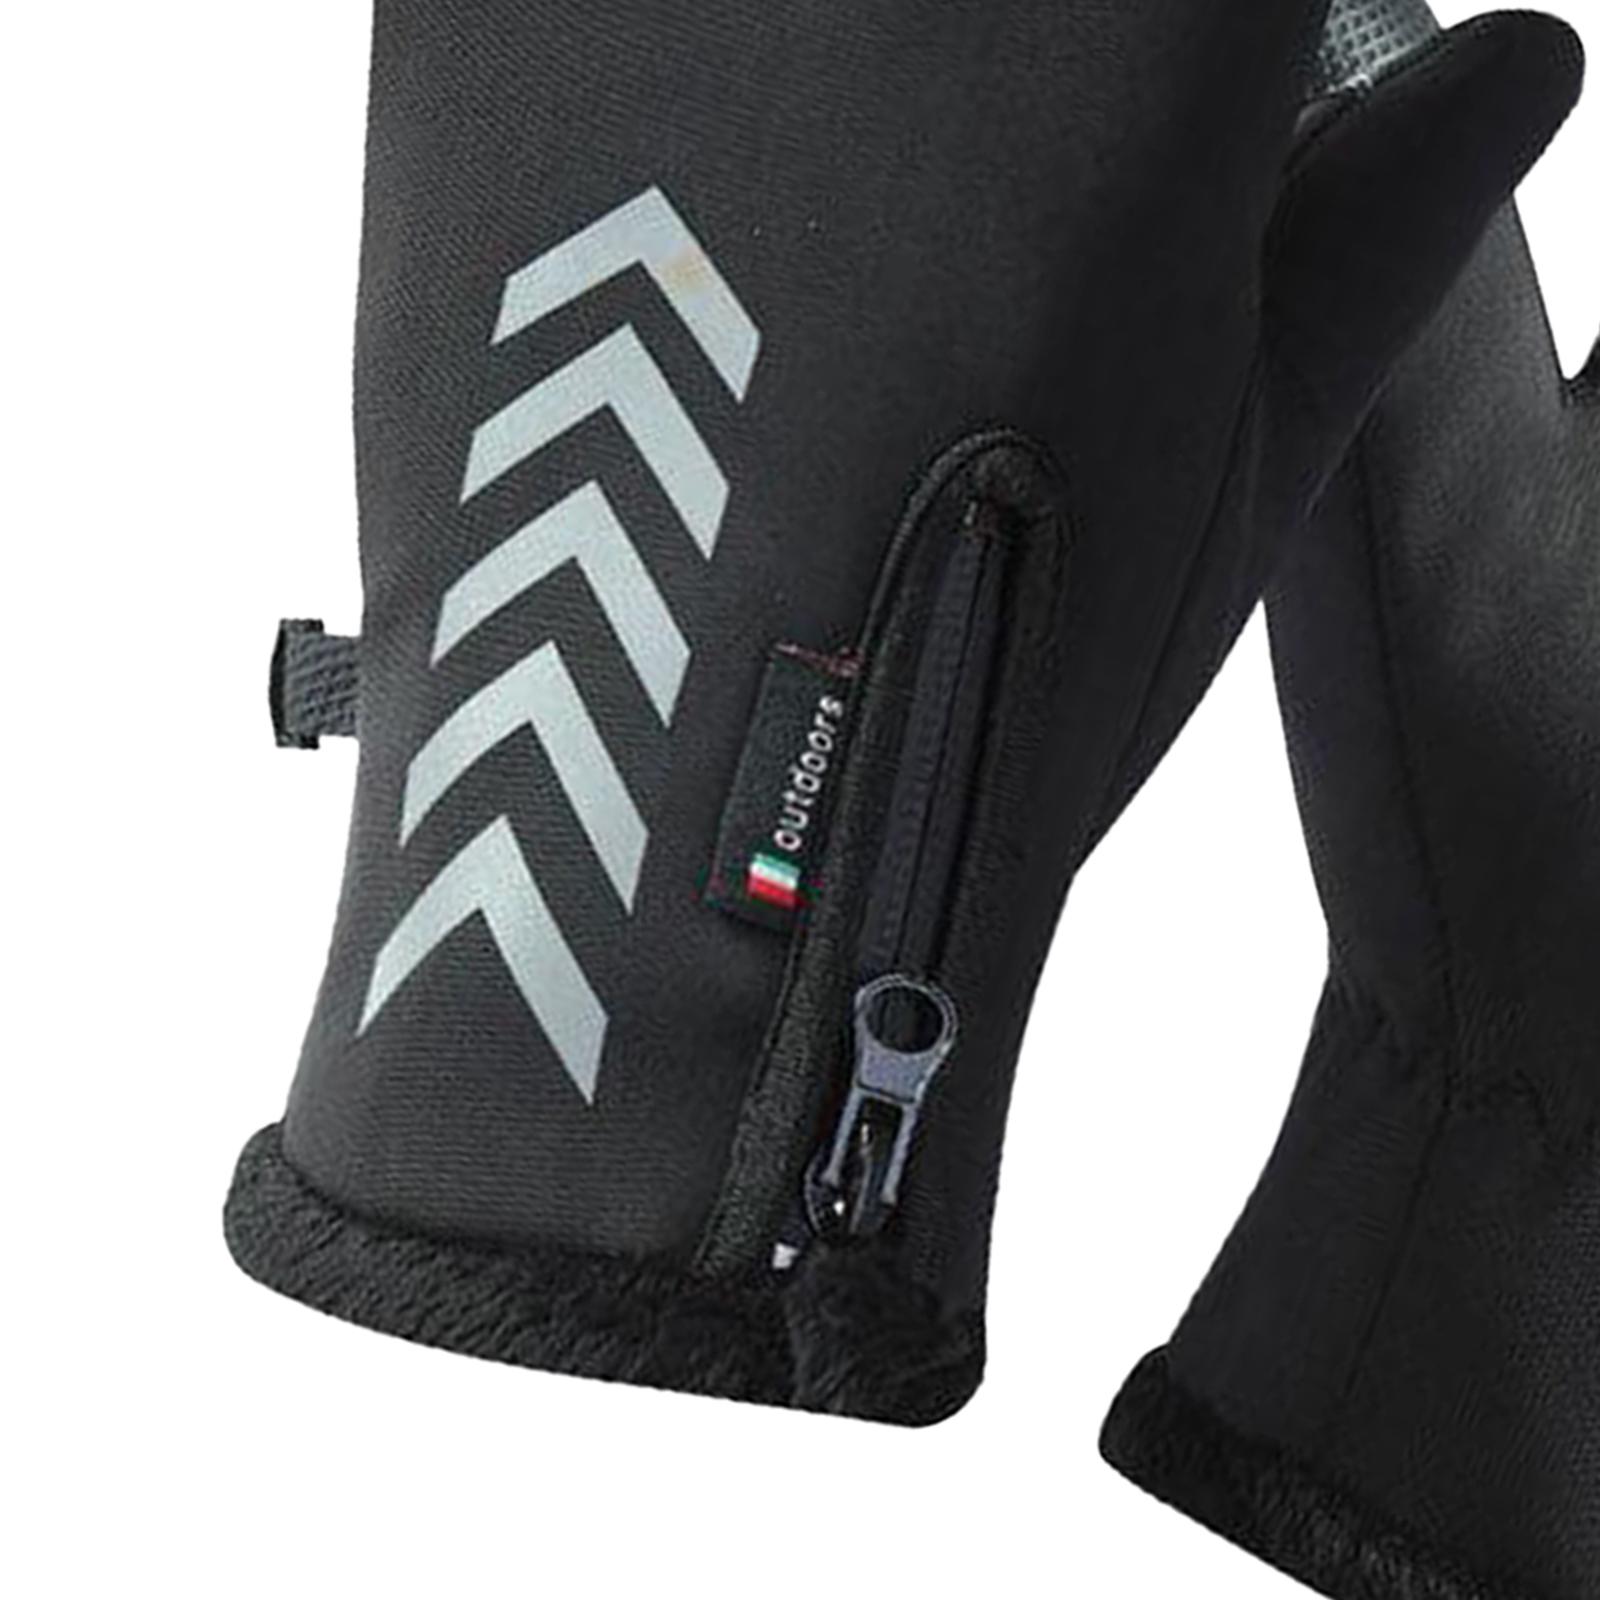 Winter Outdoor Cycling Hiking Sports Gloves Touch Screen L Black K112